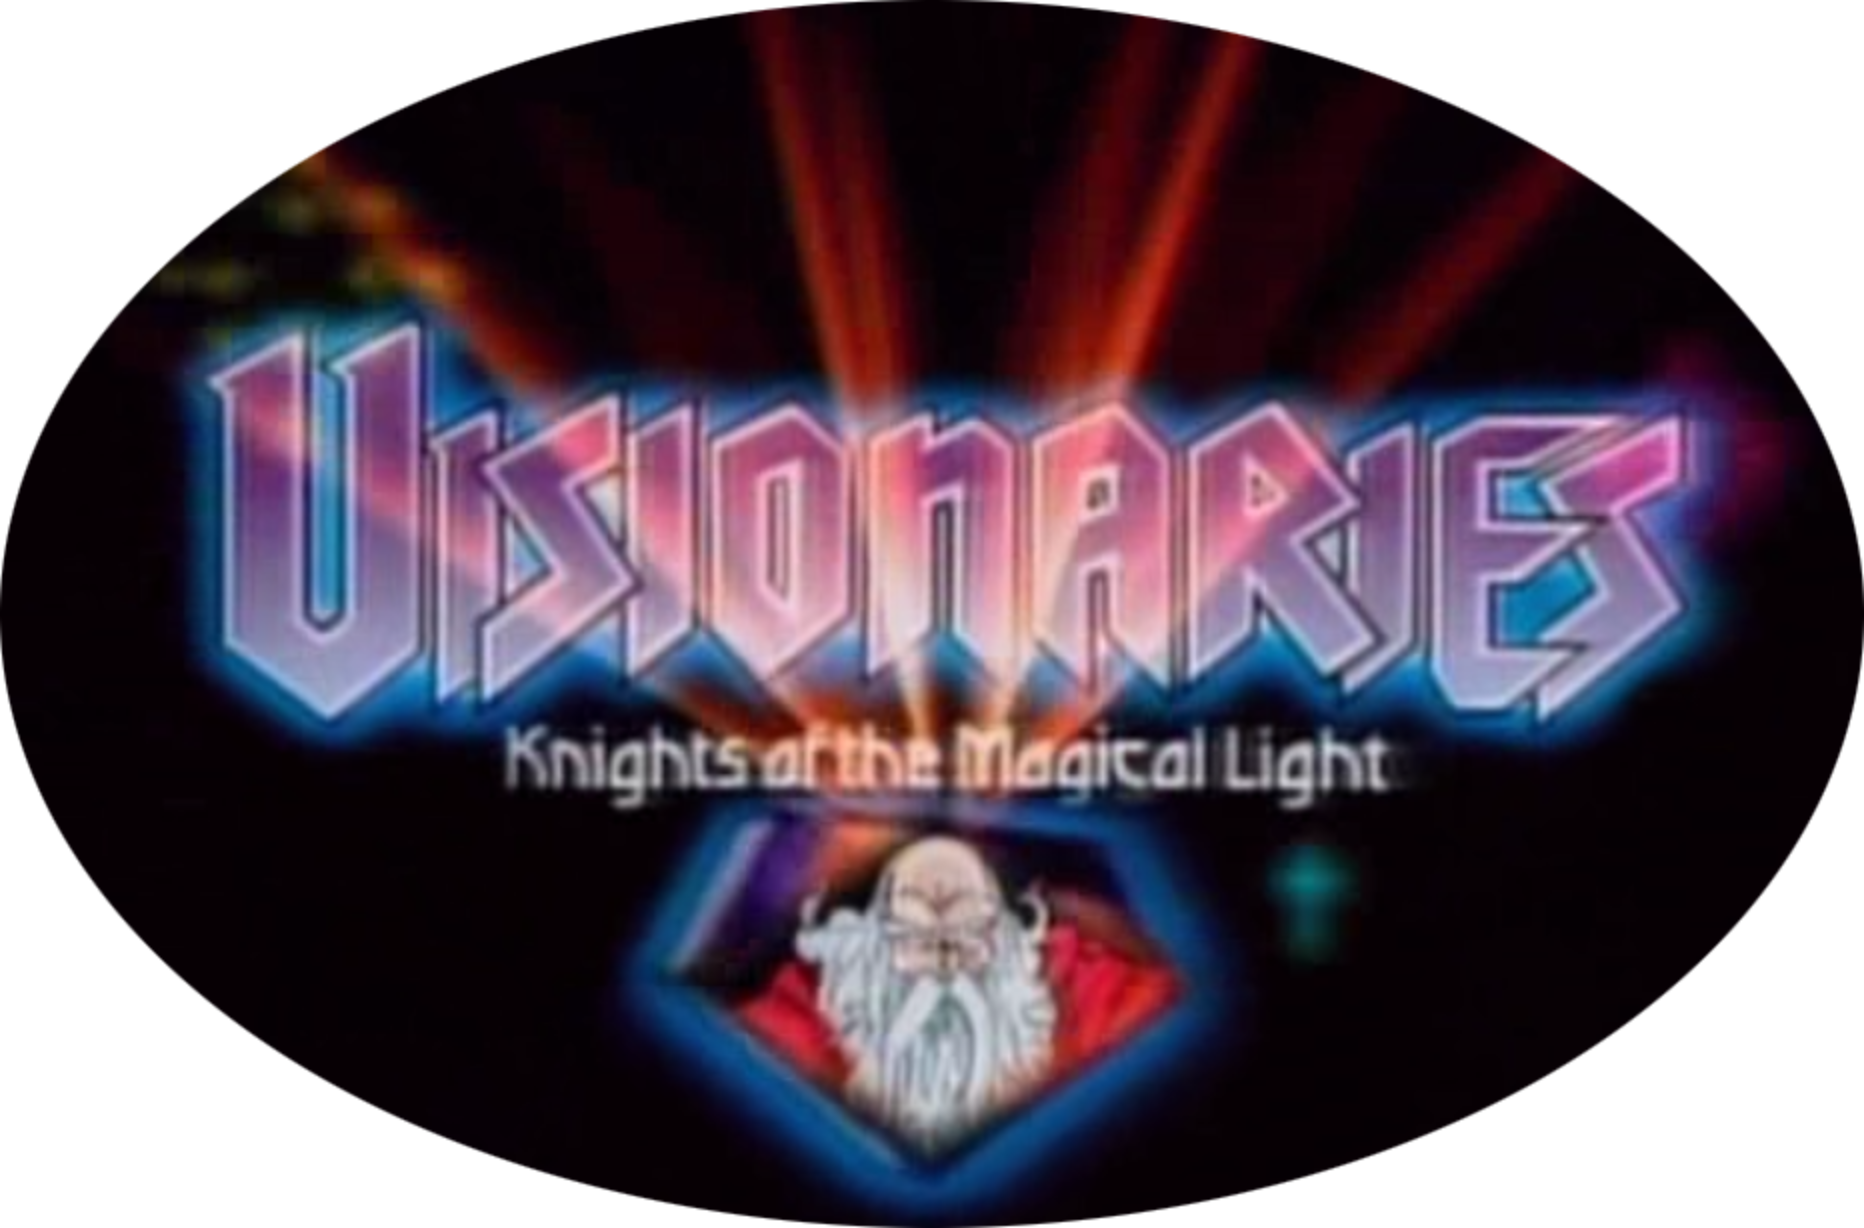 Visionaries: Knights of the Magical Light Complete 